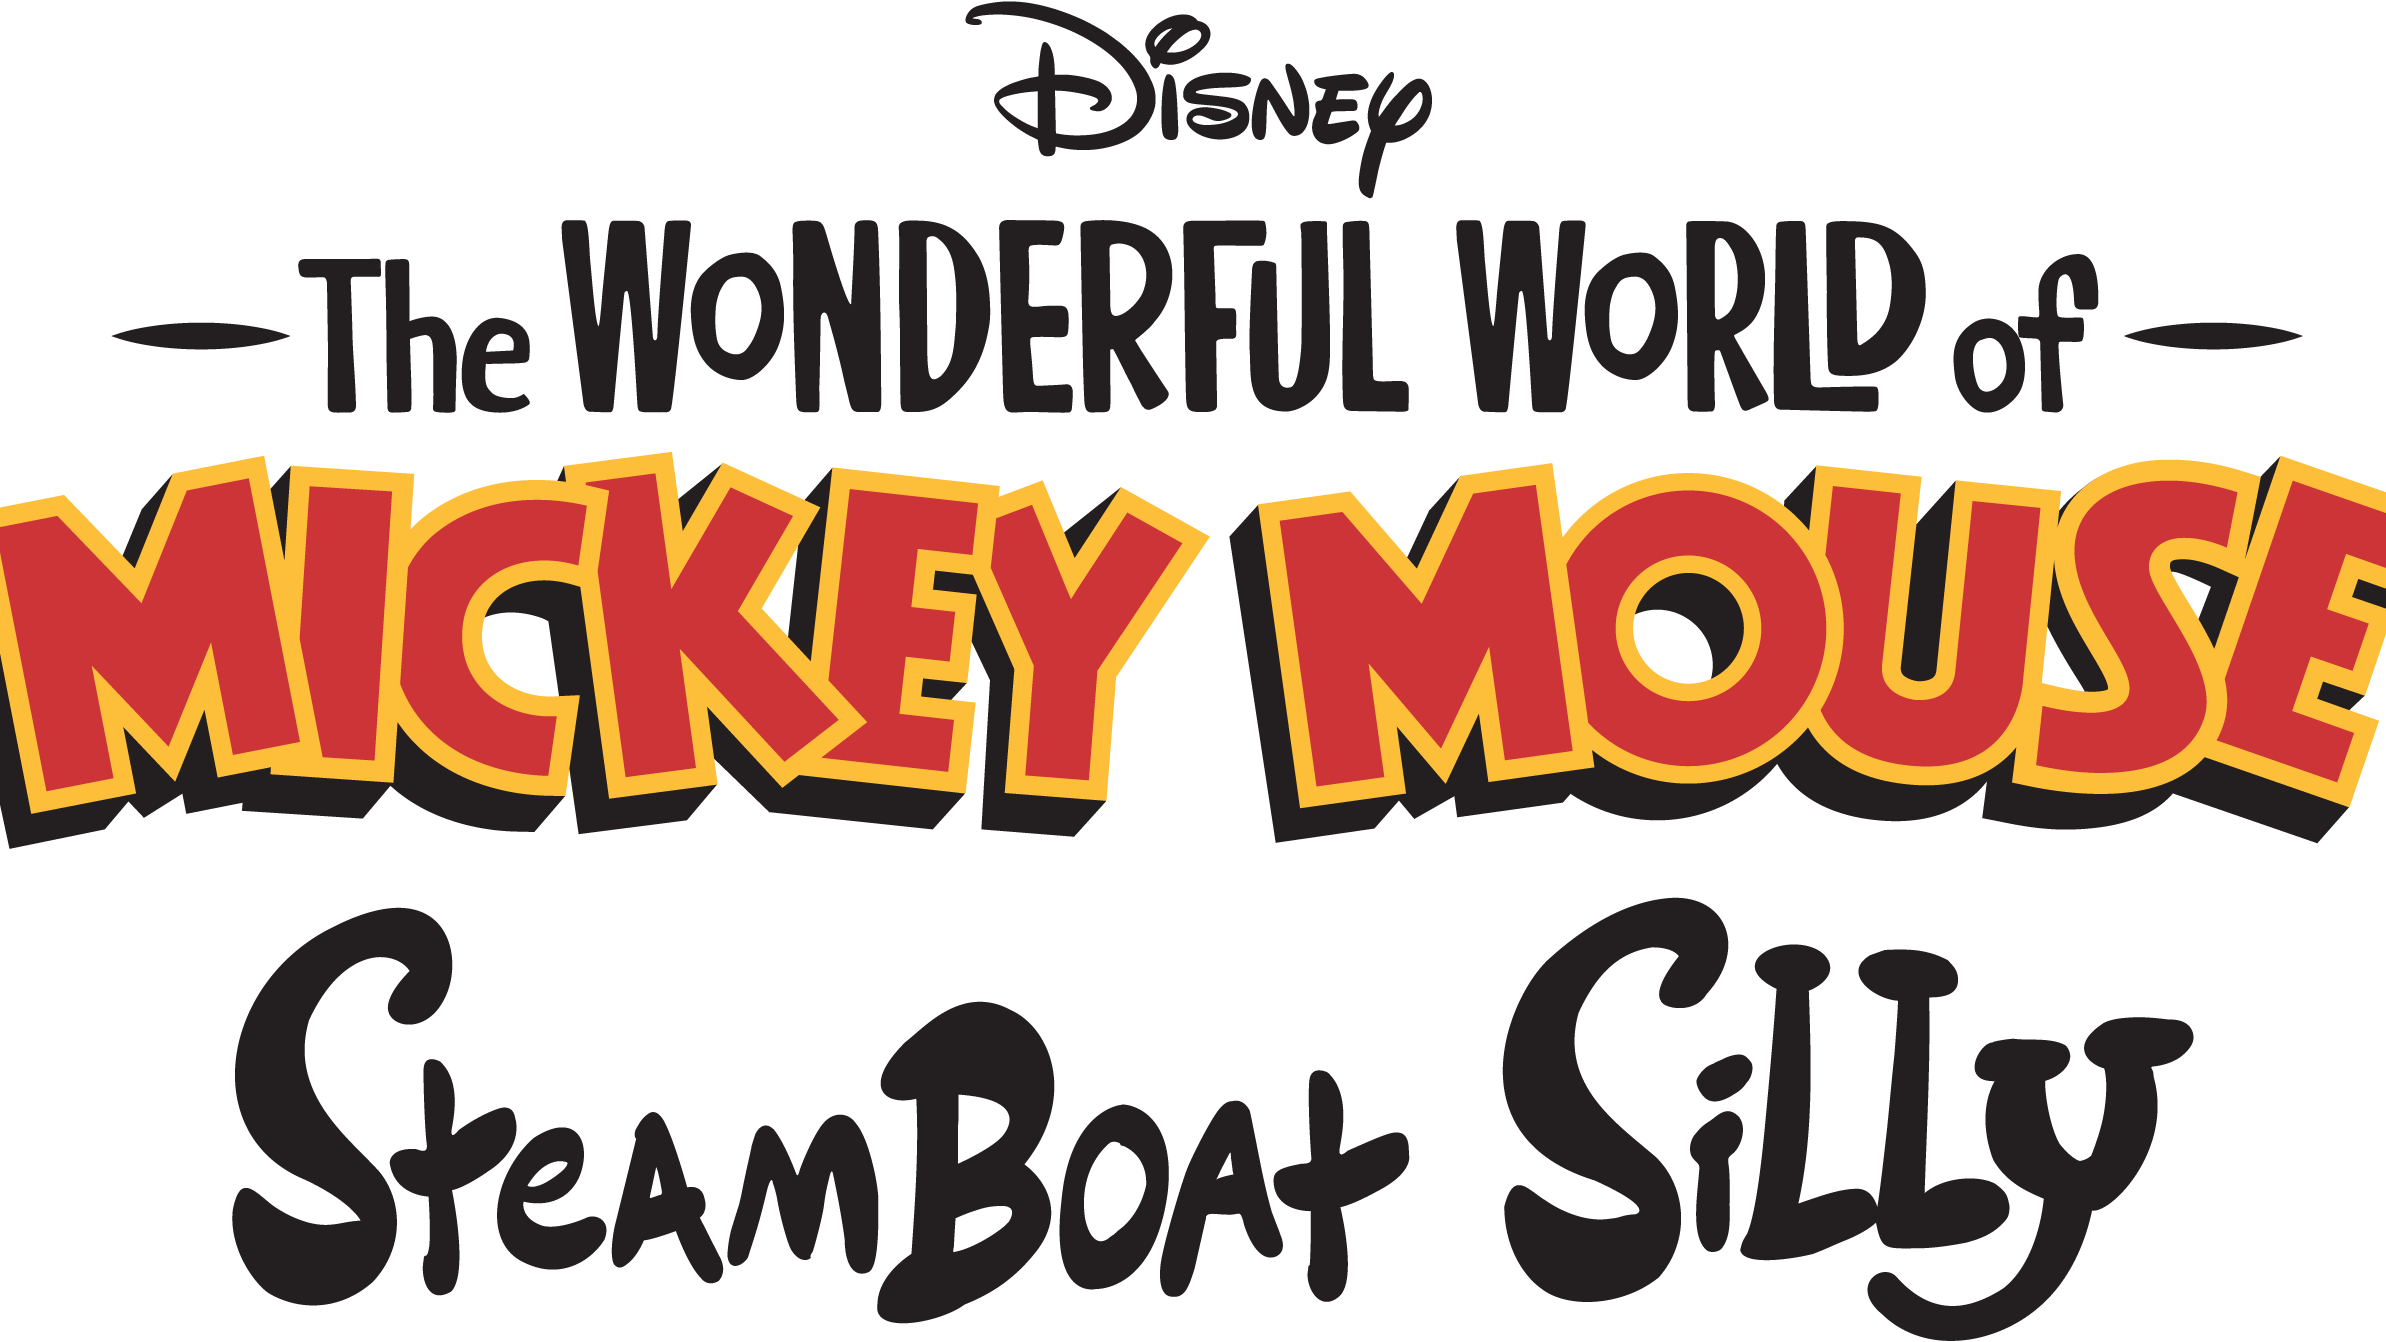 The Wonderful World of Mickey Mouse: Steamboat Silly Logo